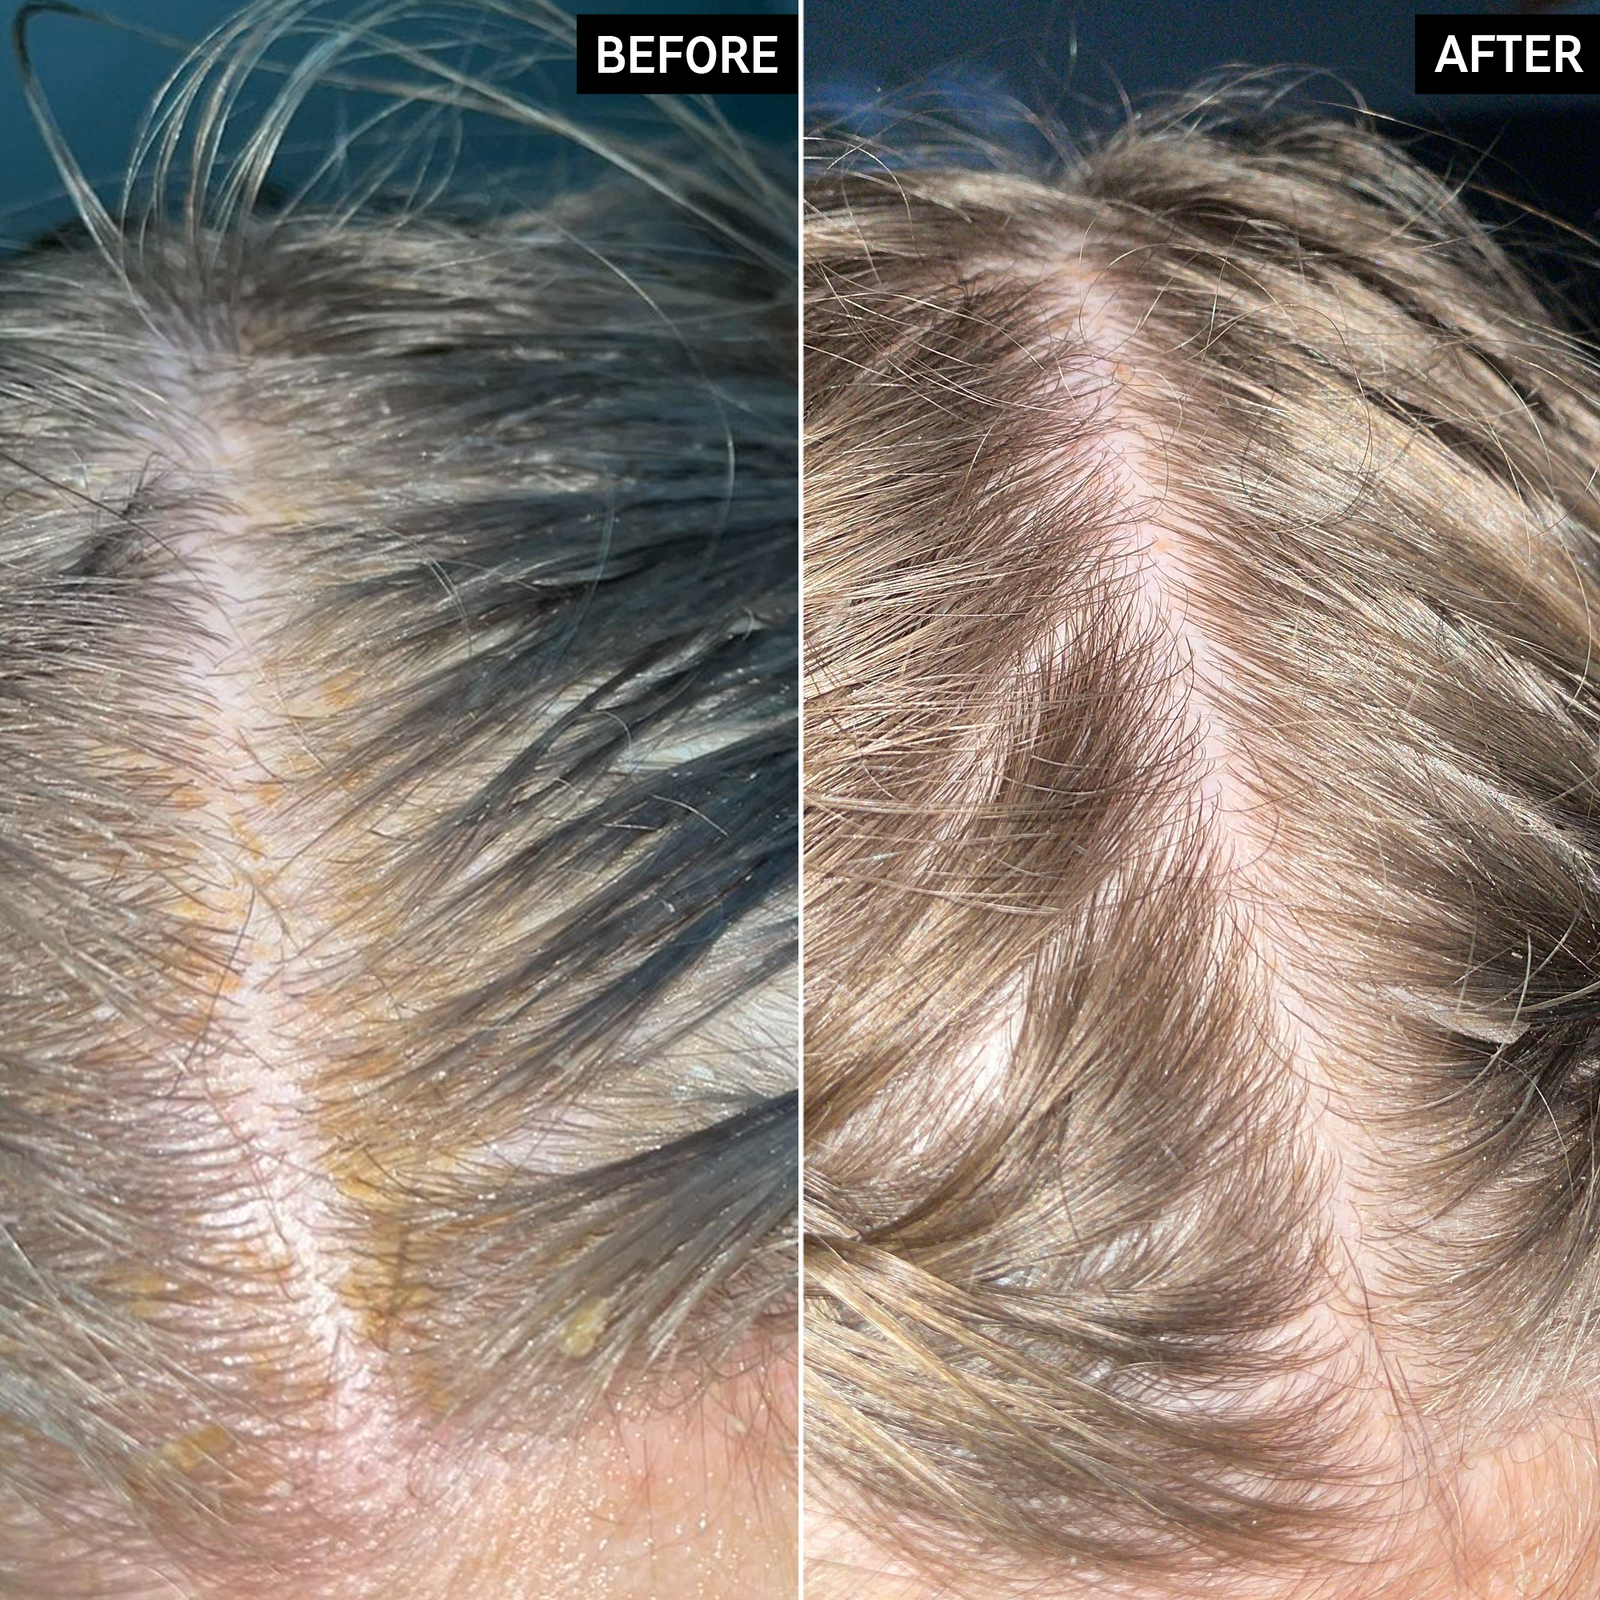 2 images of a scalp showing before and after using Salicylic Acid Exfoliating Scalp Treatment for 6 weeks